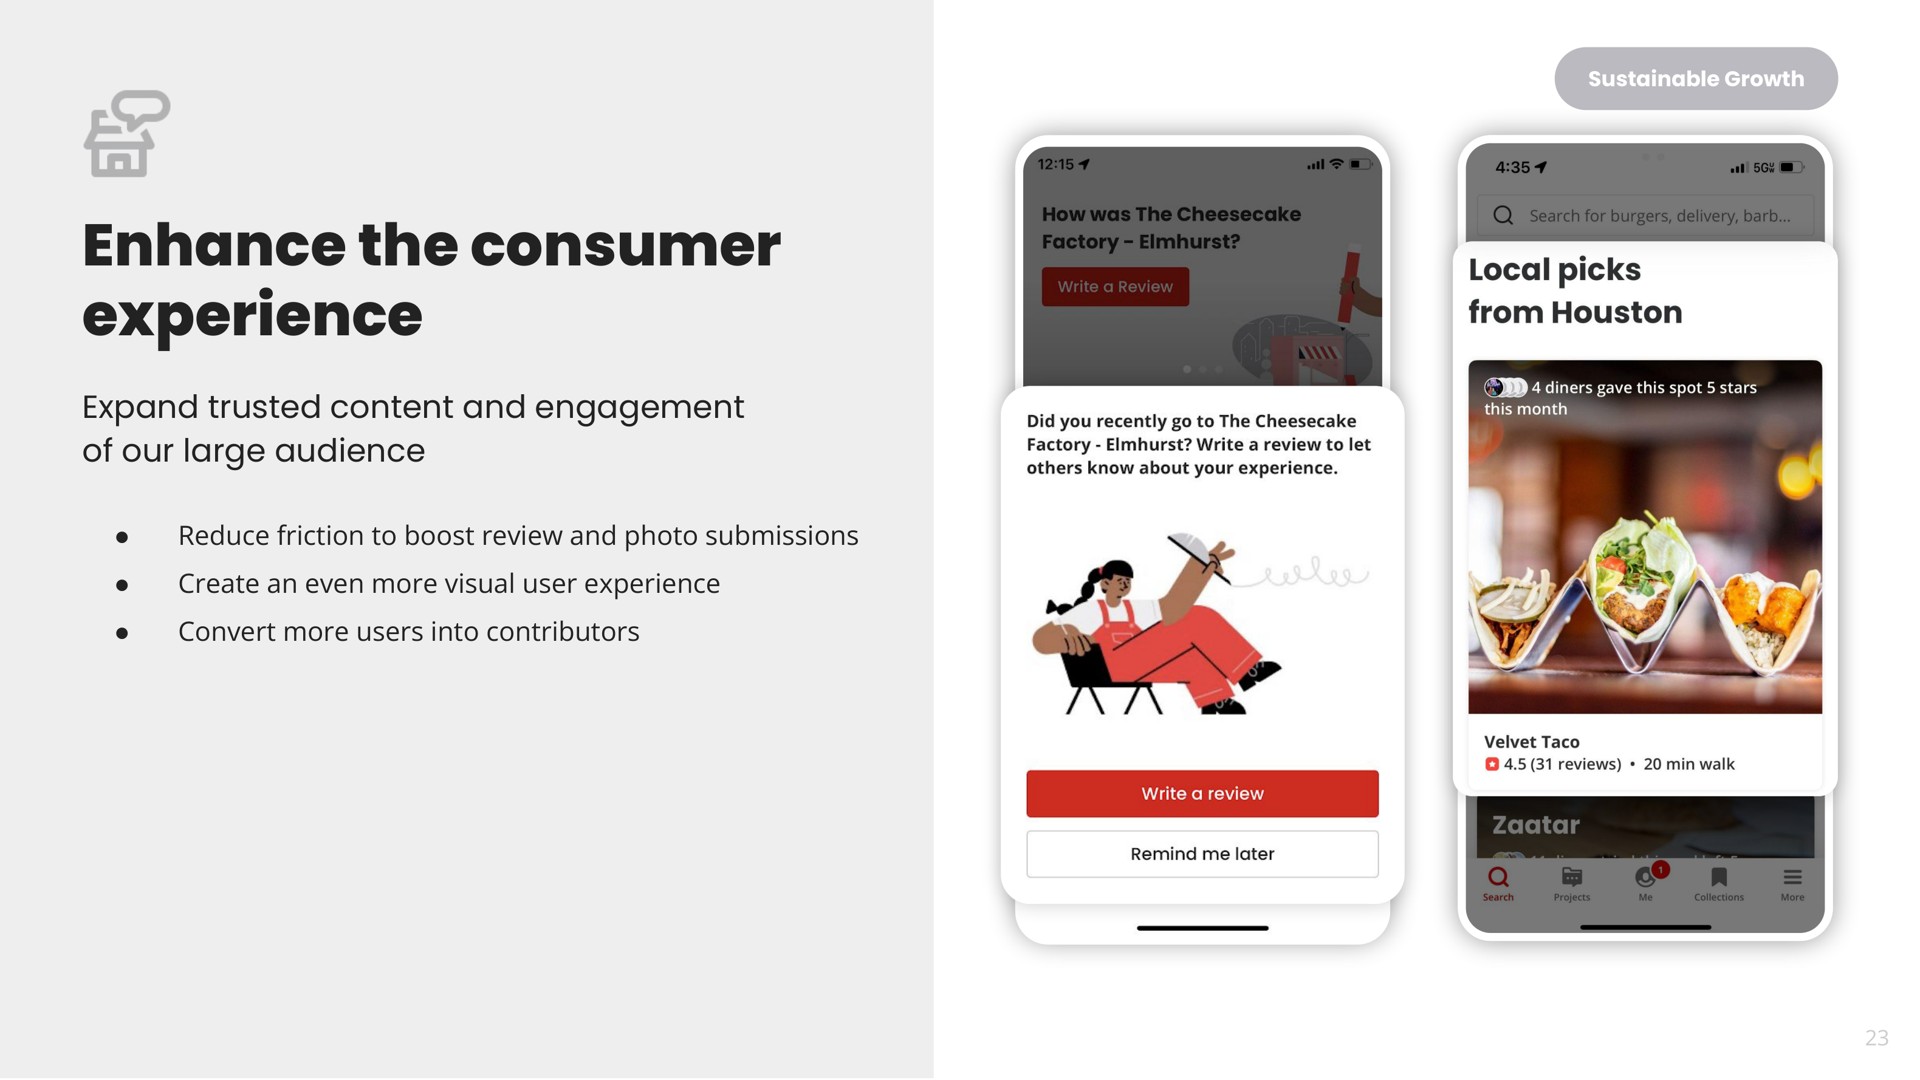 enhance the consumer experience | Yelp